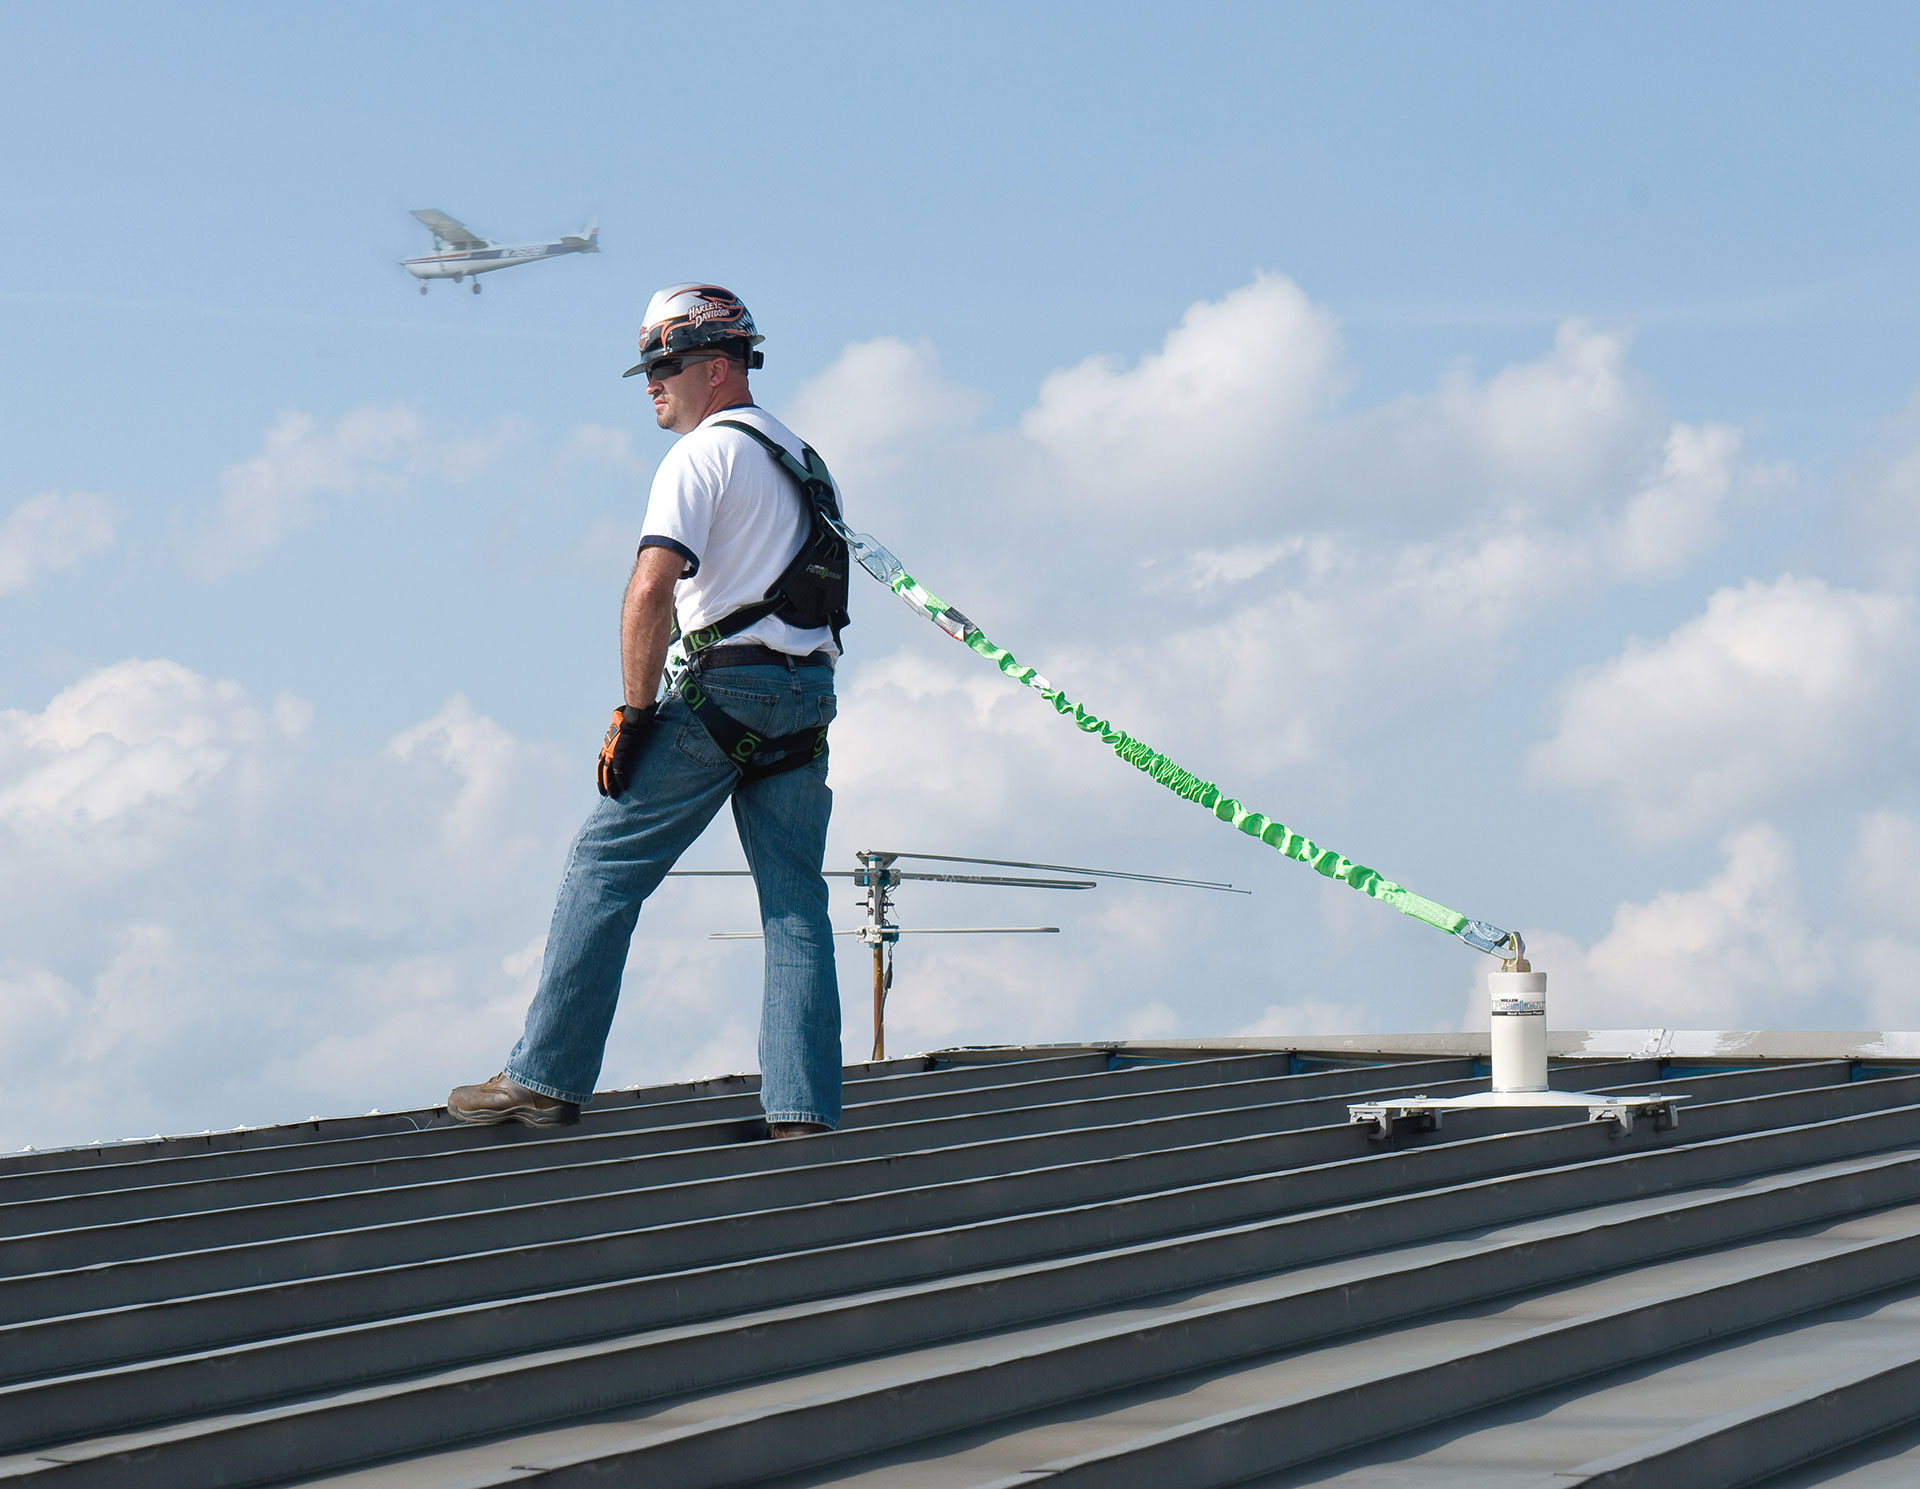 roof-fall-protection-systems-1822-fall-arrest-roof-safety-systems